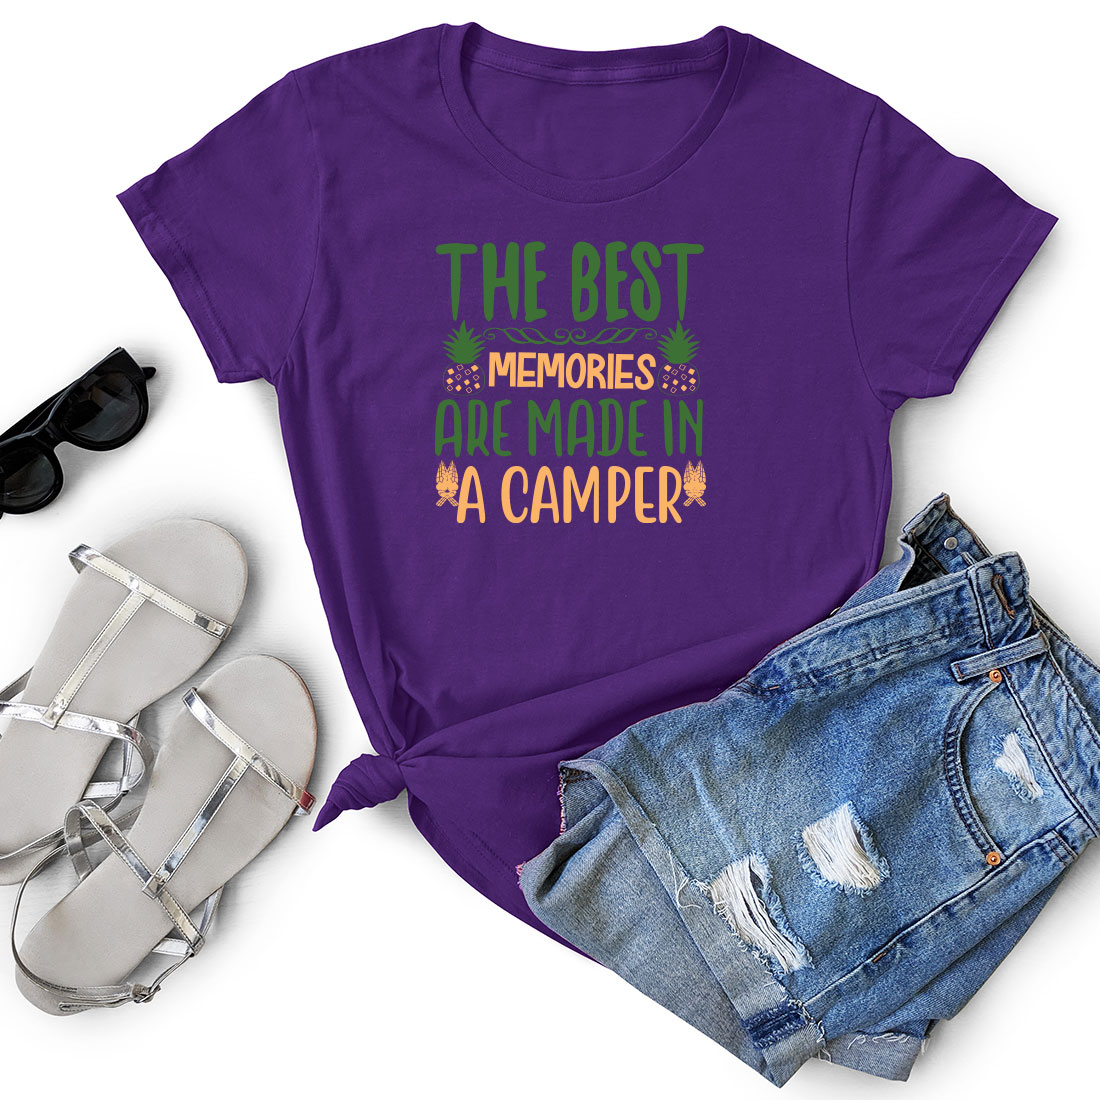 The best memories are made in a camper t - shirt.